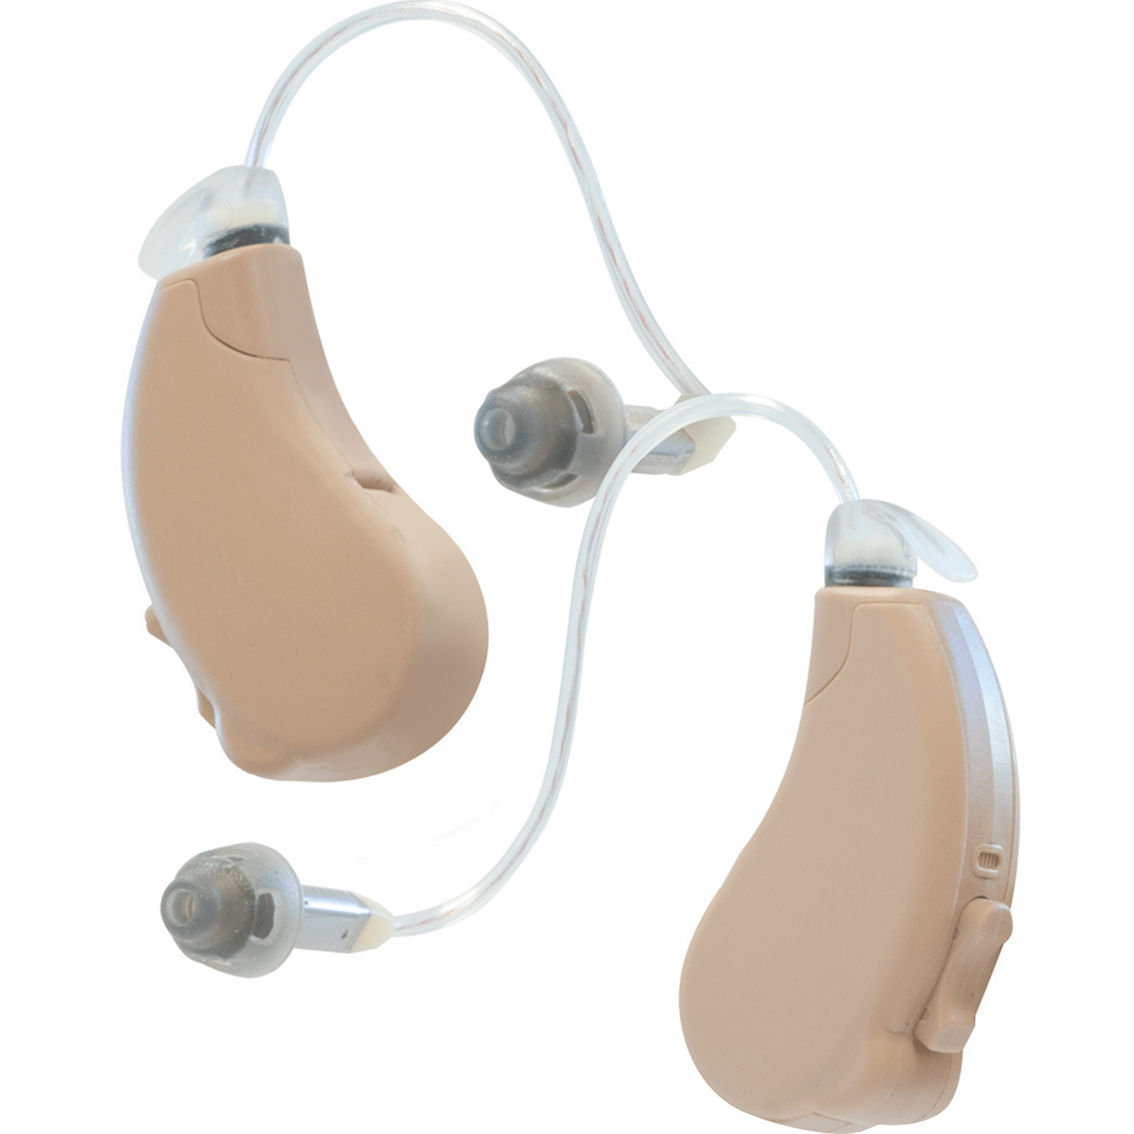 Lucid Hearing Engage Premium OTC Hearing Aid for iPhone - Image 1 of 2